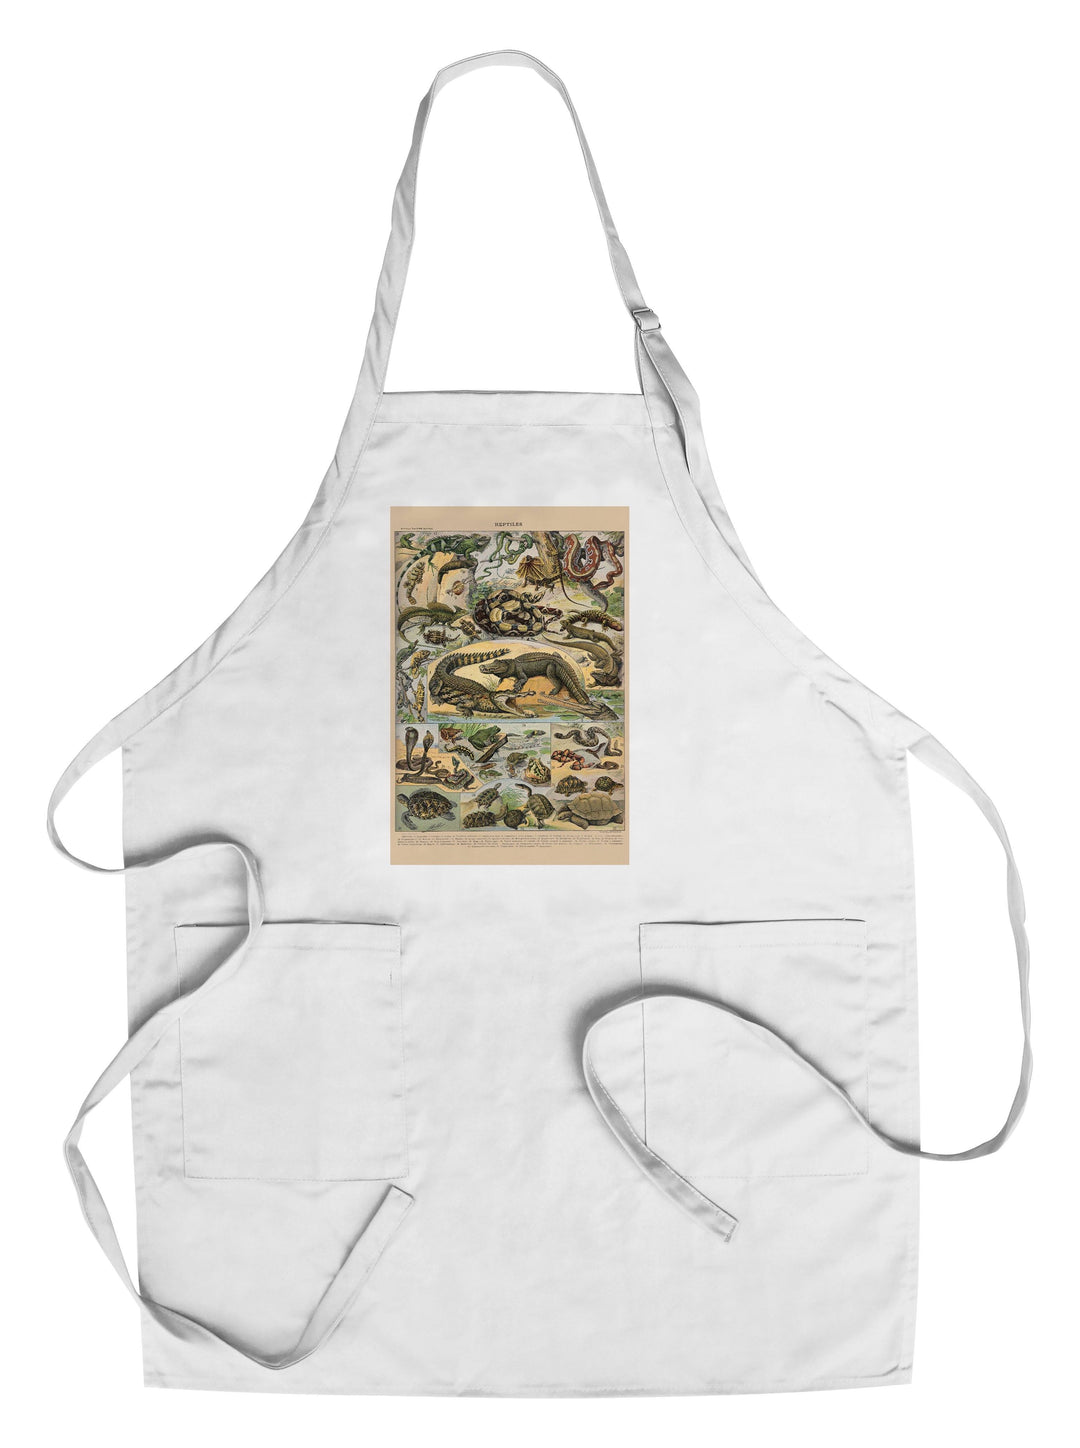 Reptiles, A, Vintage Bookplate, Adolphe Millot Artwork, Towels and Aprons Kitchen Lantern Press Chef's Apron 